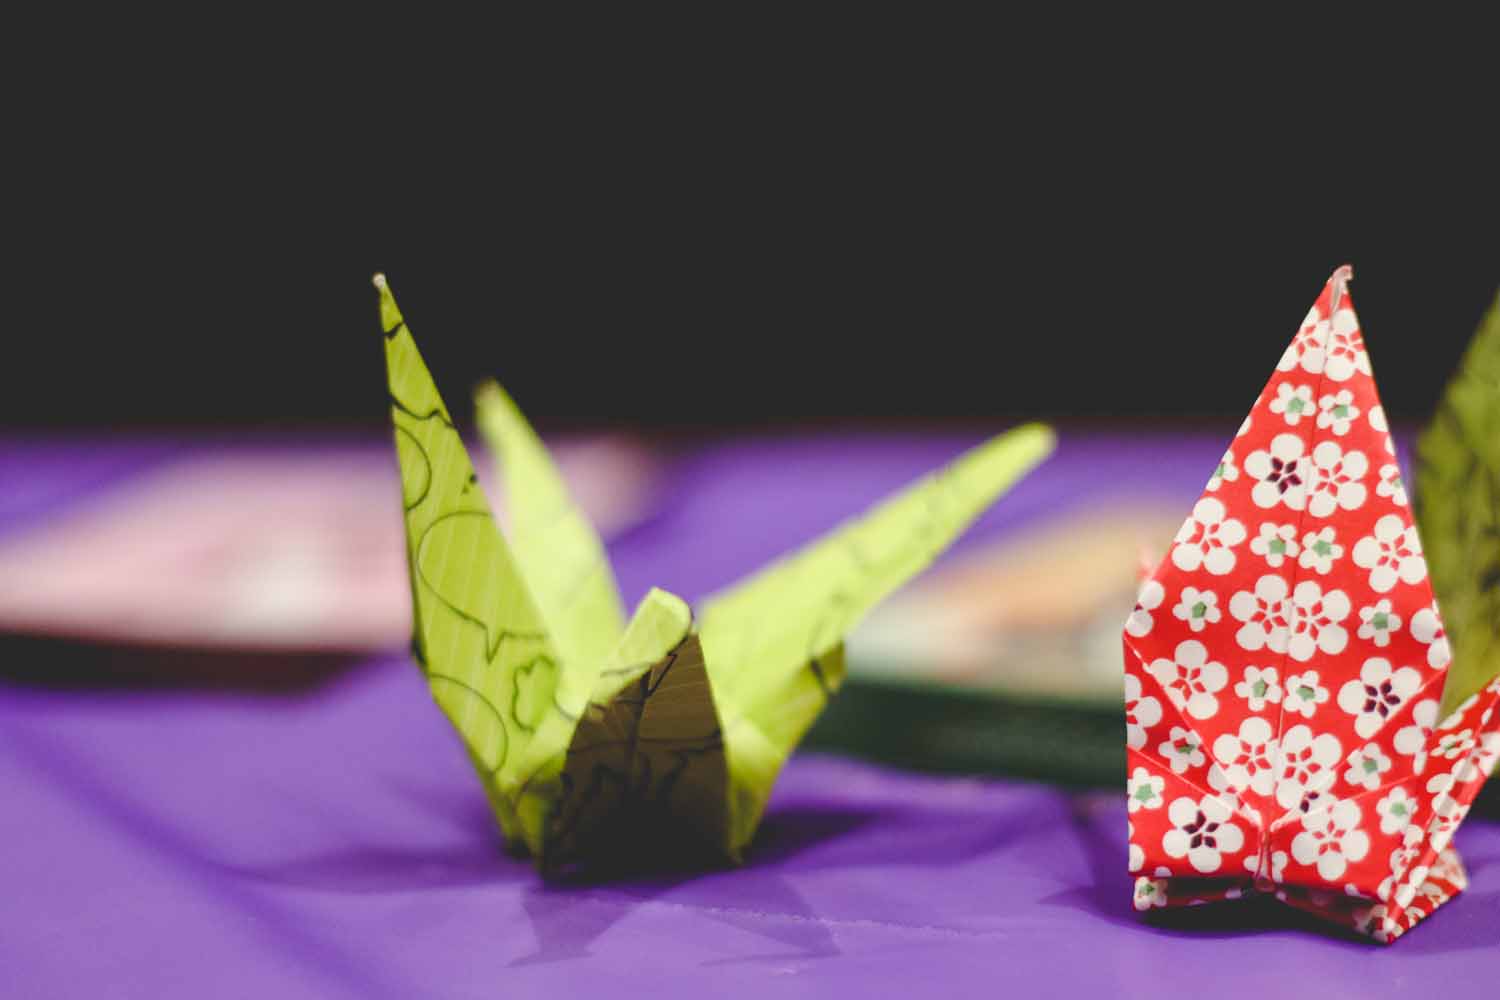 Japanese origami paper crane were on display. Photo by Hanna Yowell.